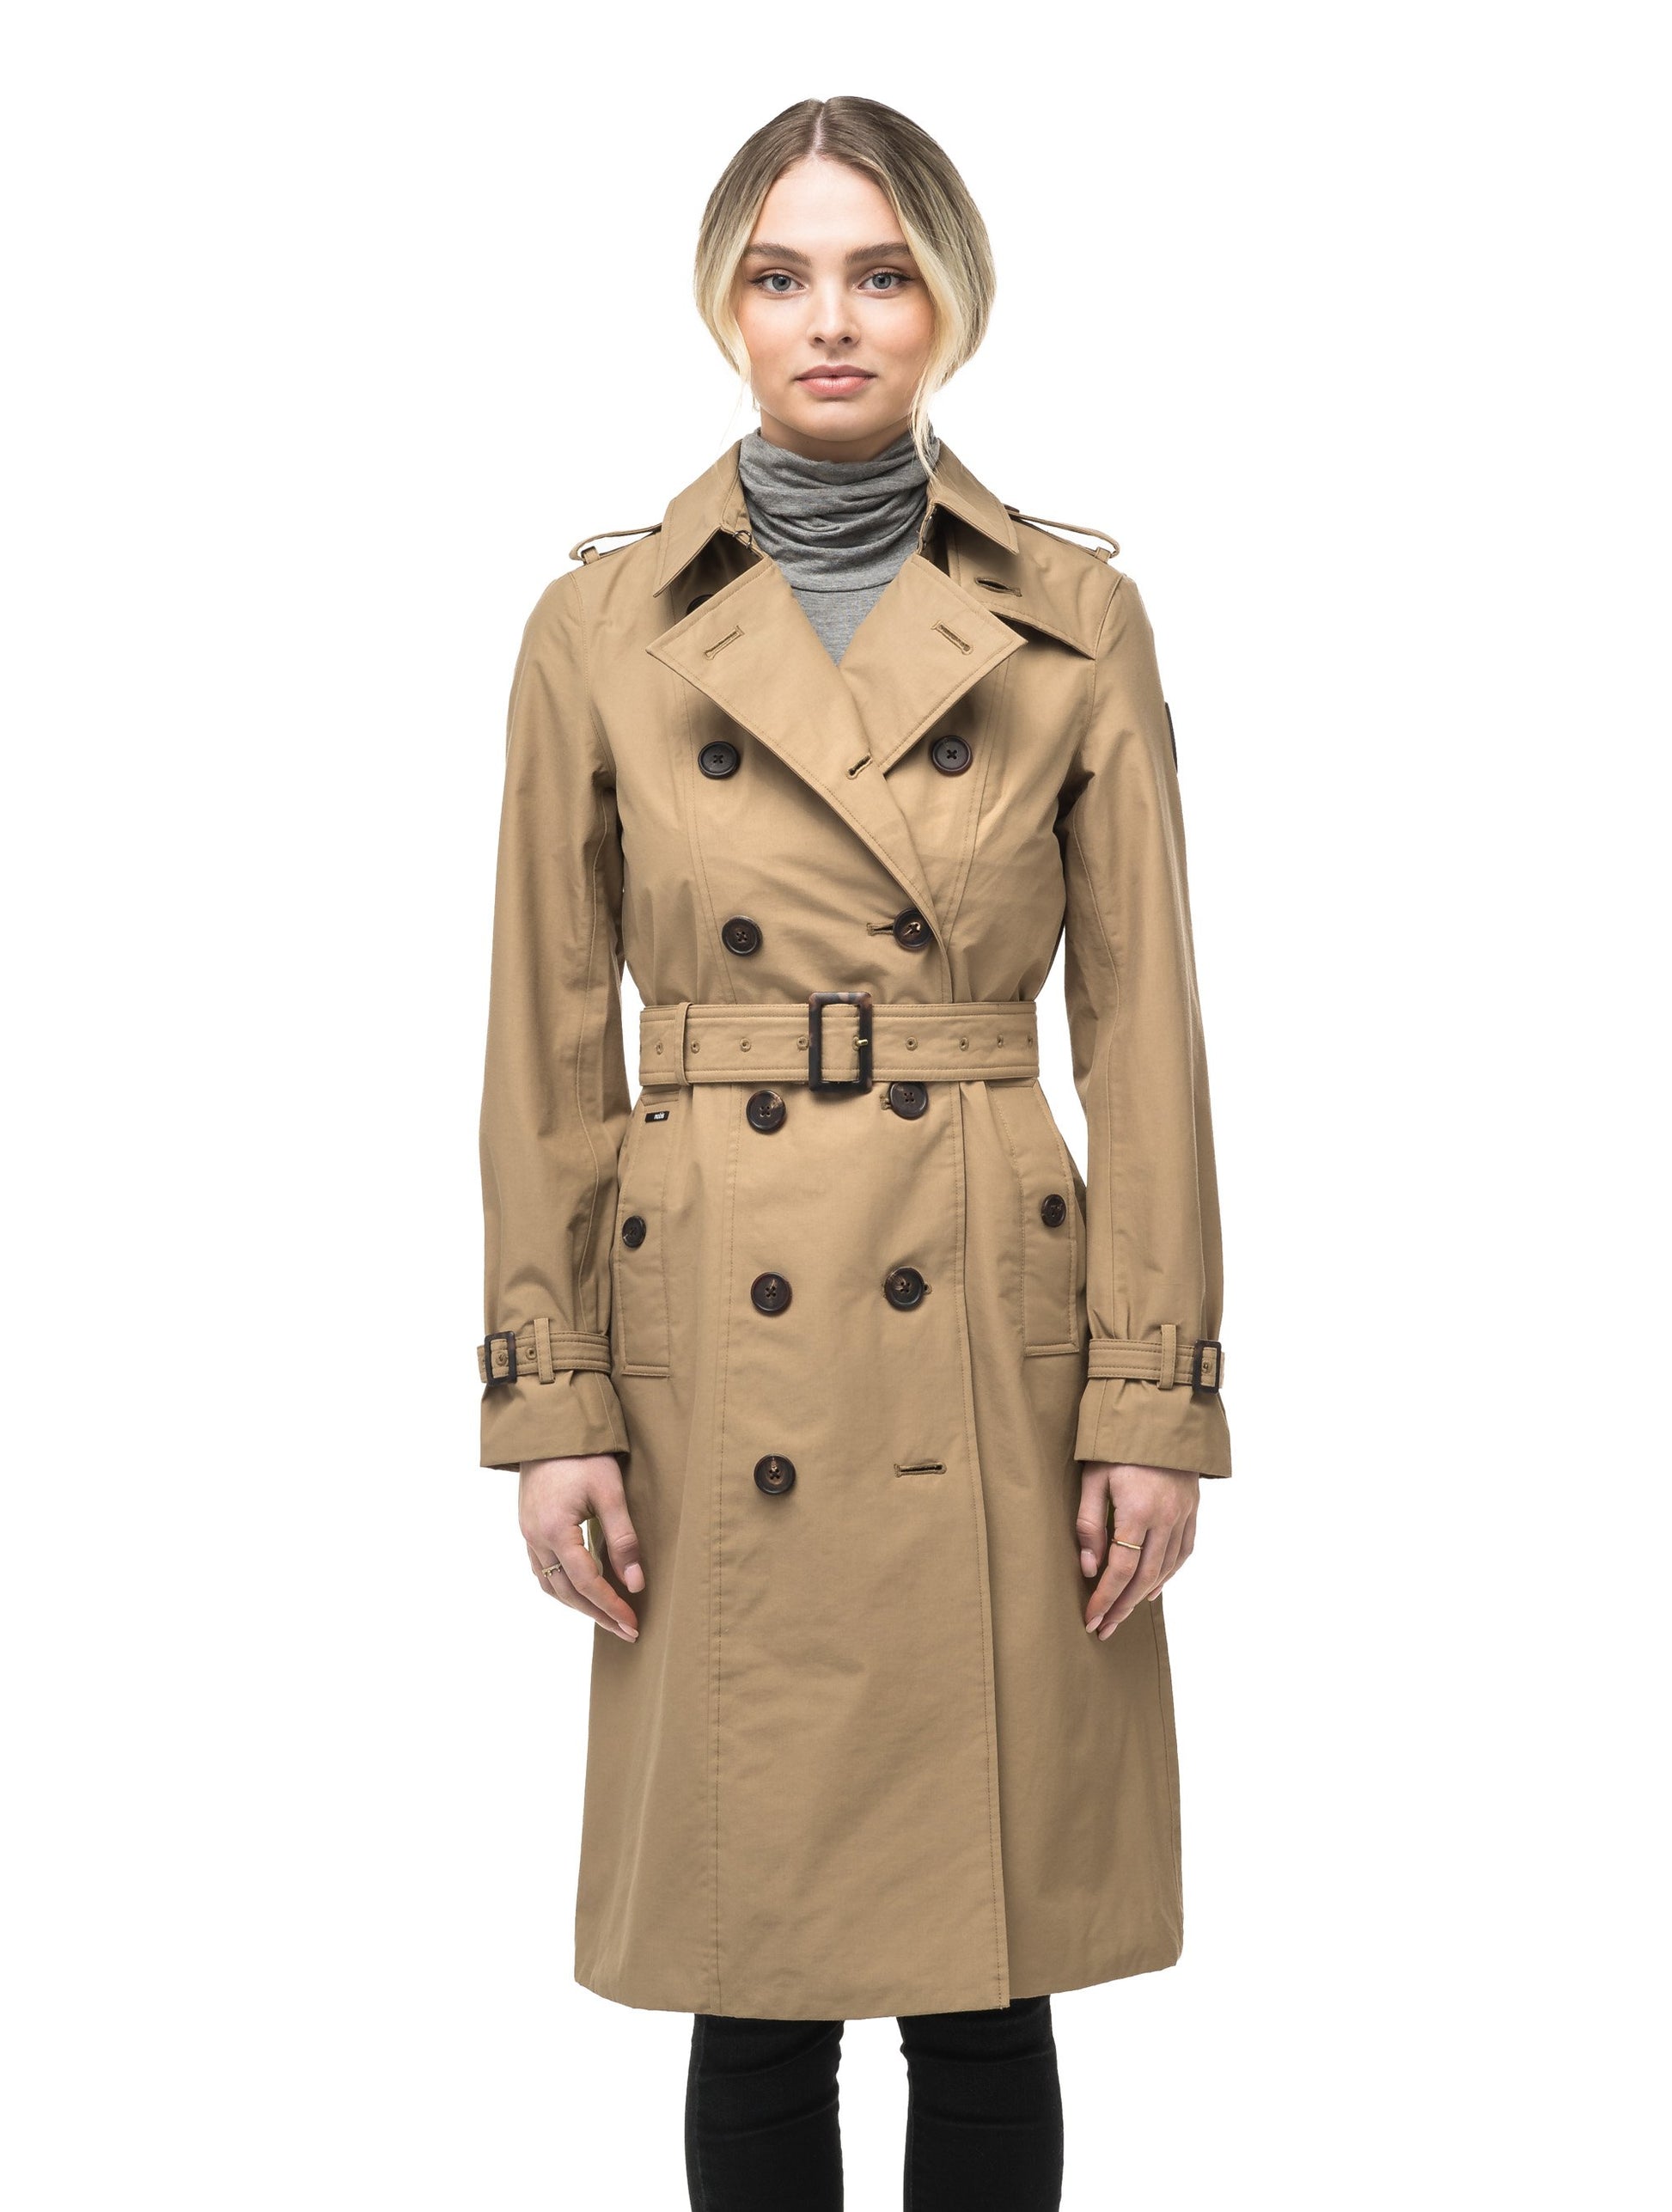 Women's knee length trench coat with removable belt in Cork